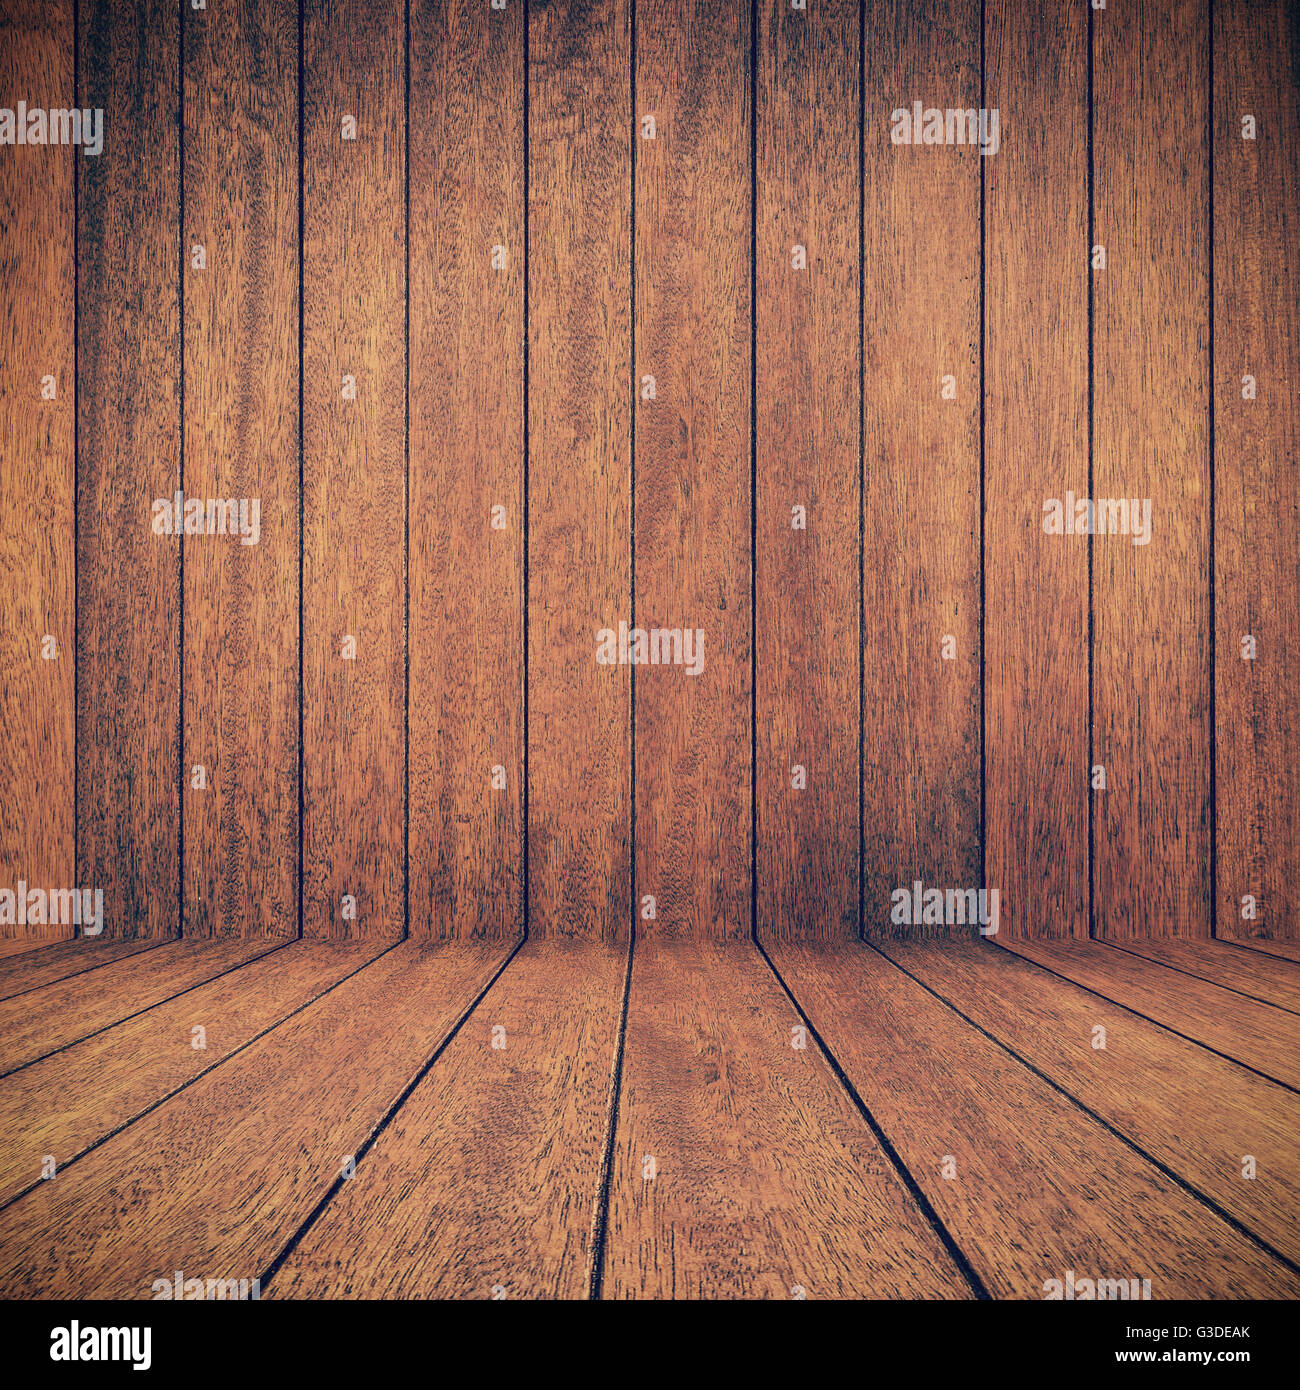 wood background and texture Stock Photo